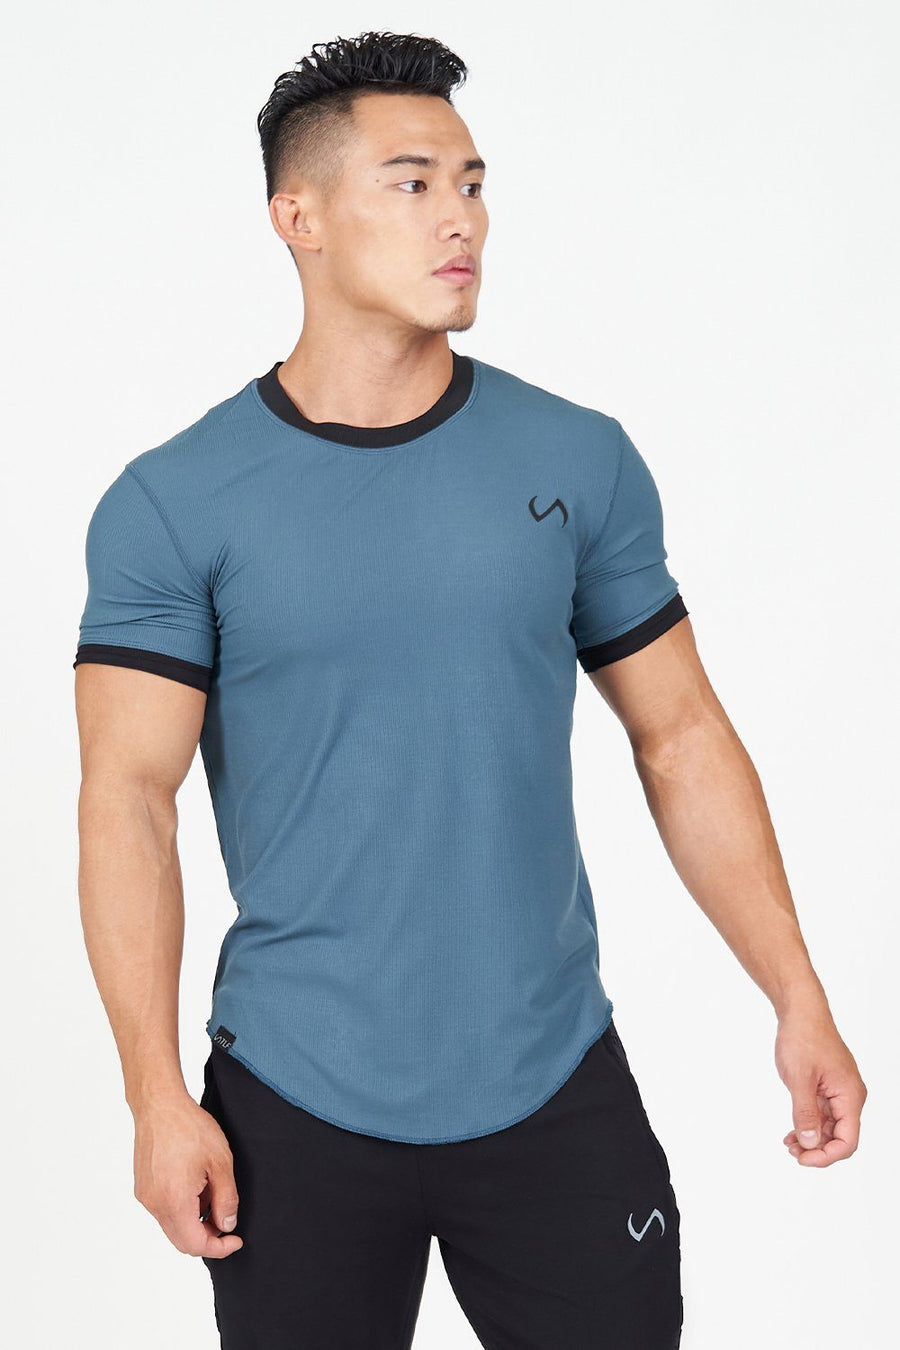 TLF Surge Classic Tee | Men's Ribbed Muscle Shirt – BLUE - 1